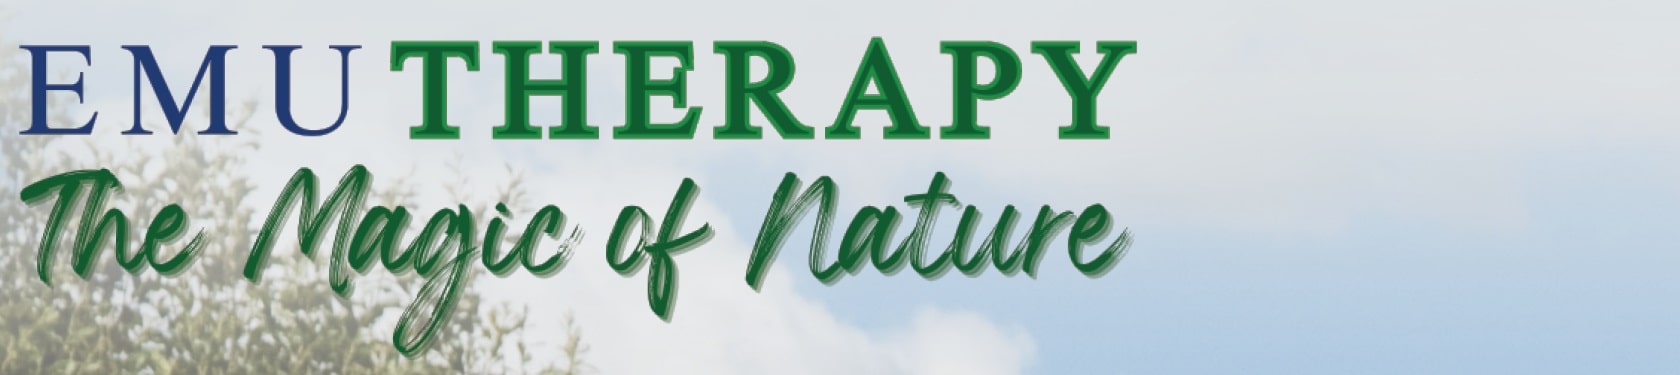 Emu Therapy - The Magic of Nature